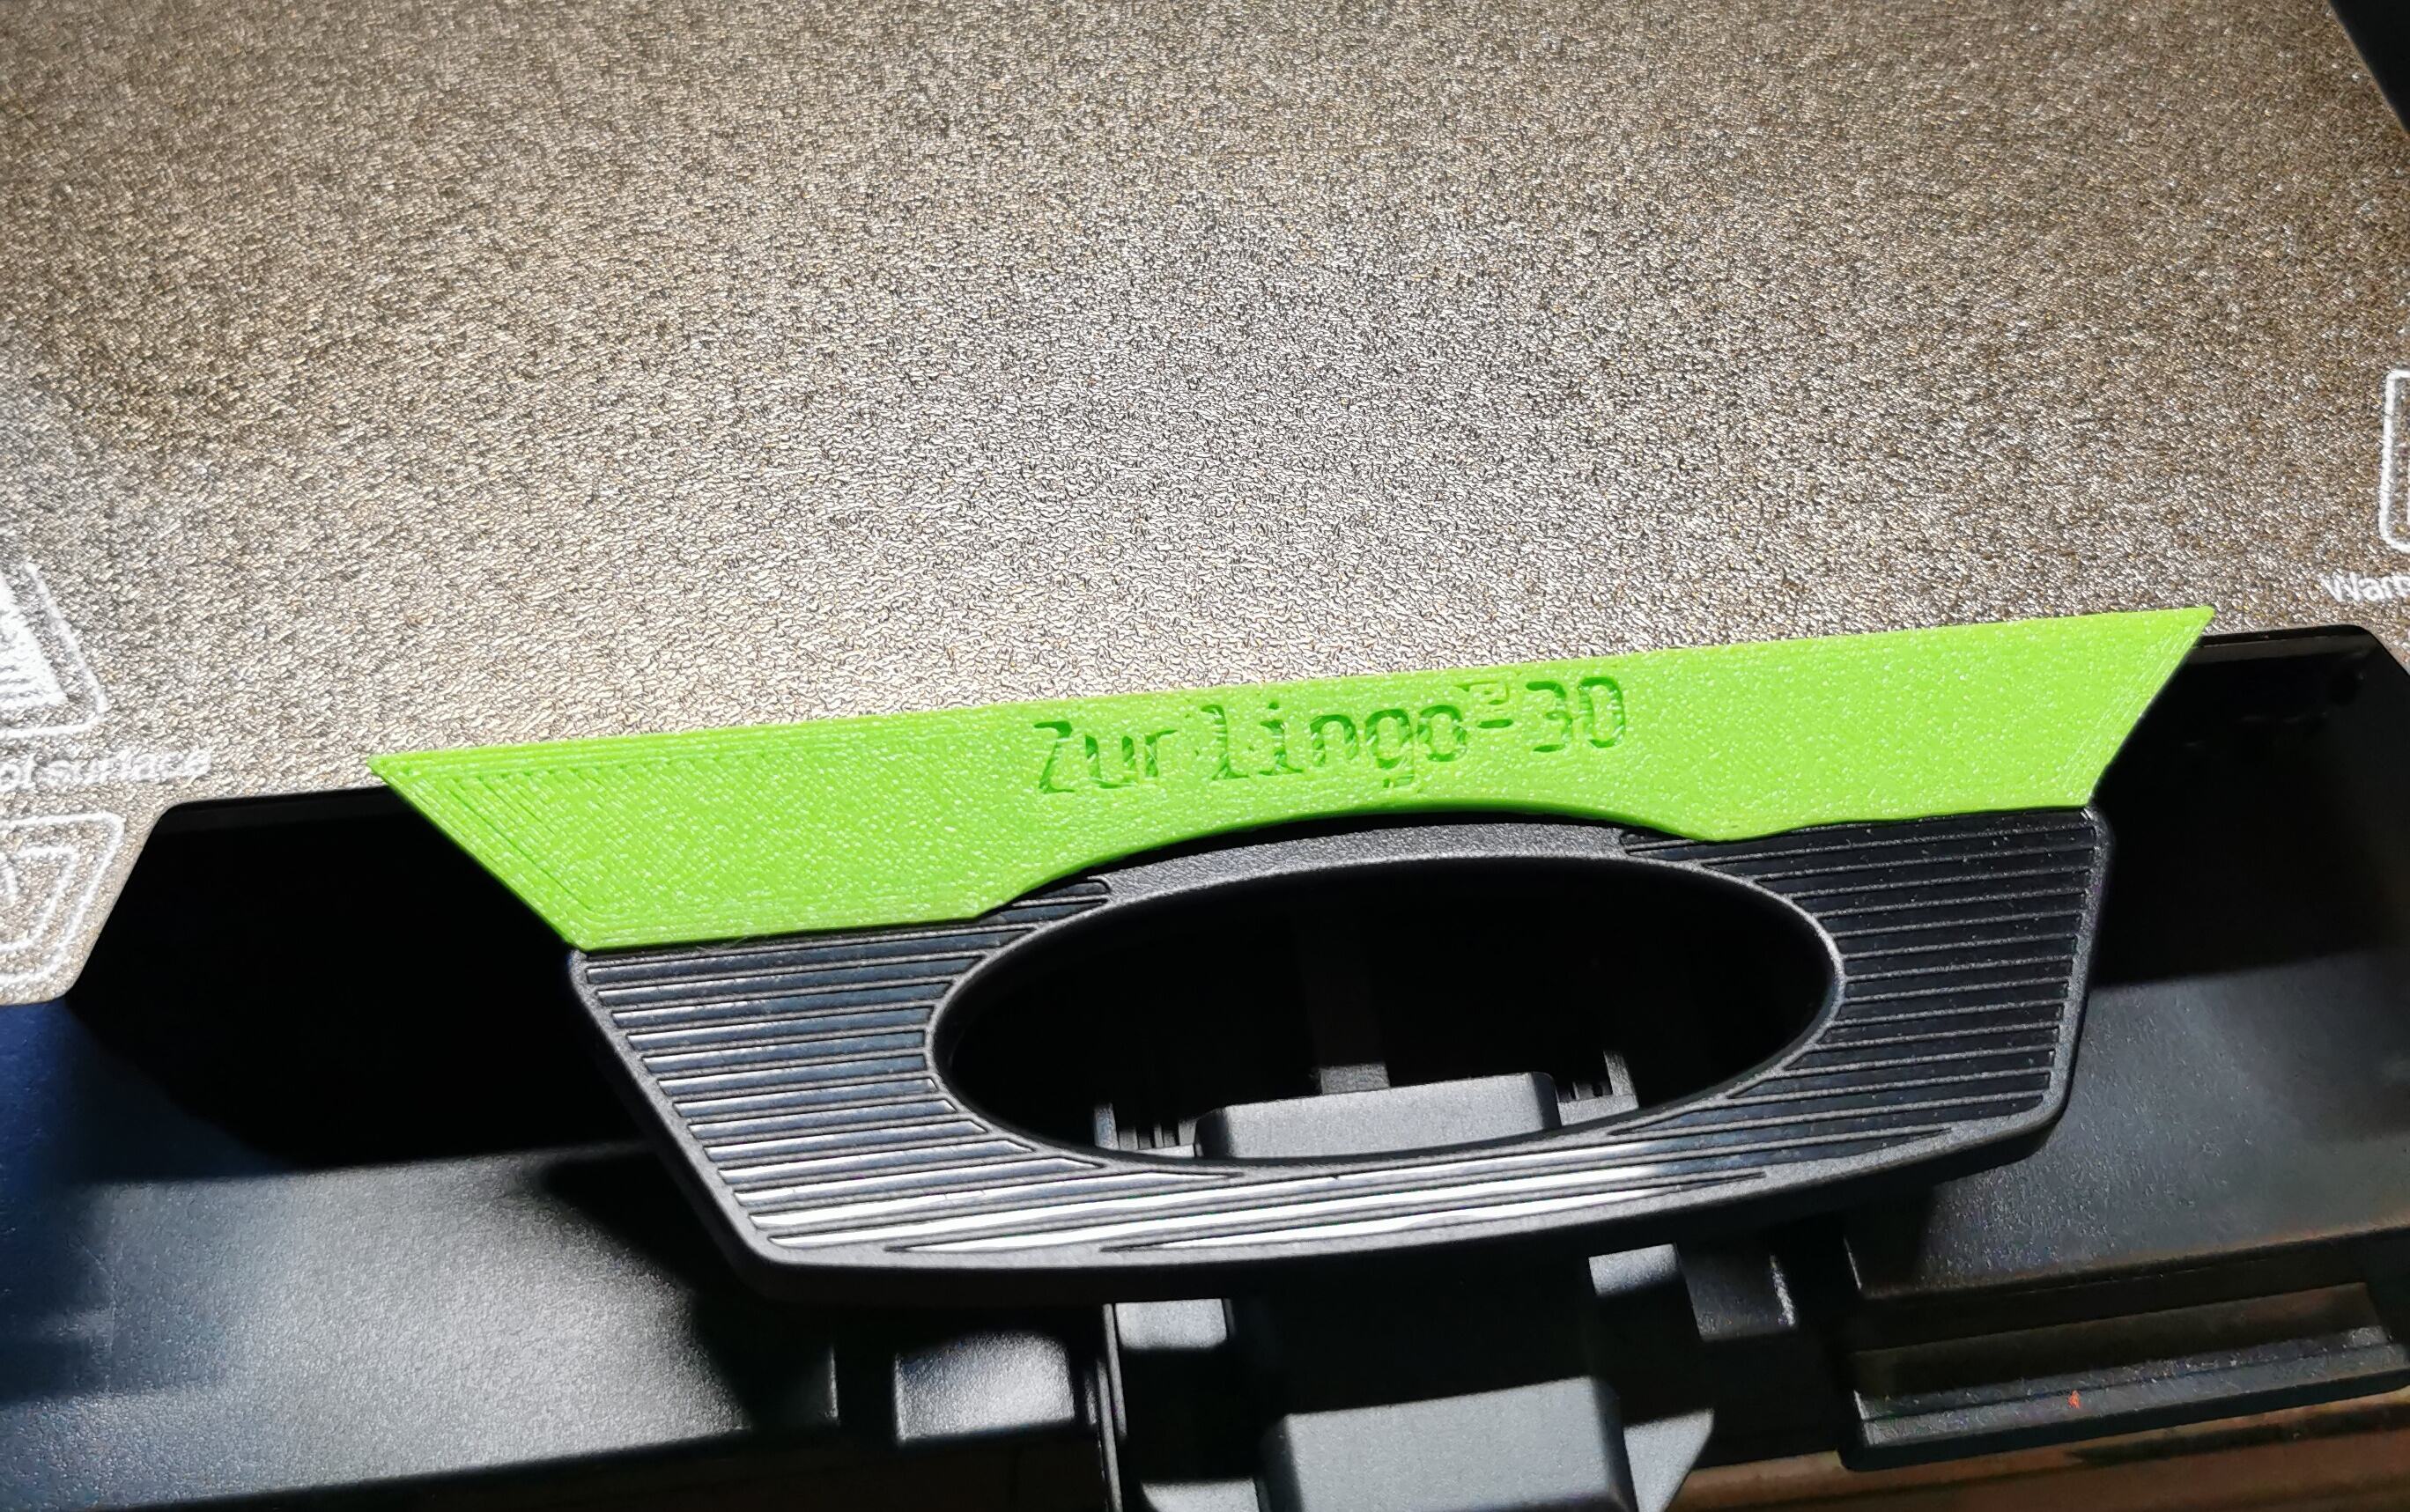 Ender 3 S1 Pro - Bed Alignment Stop-1